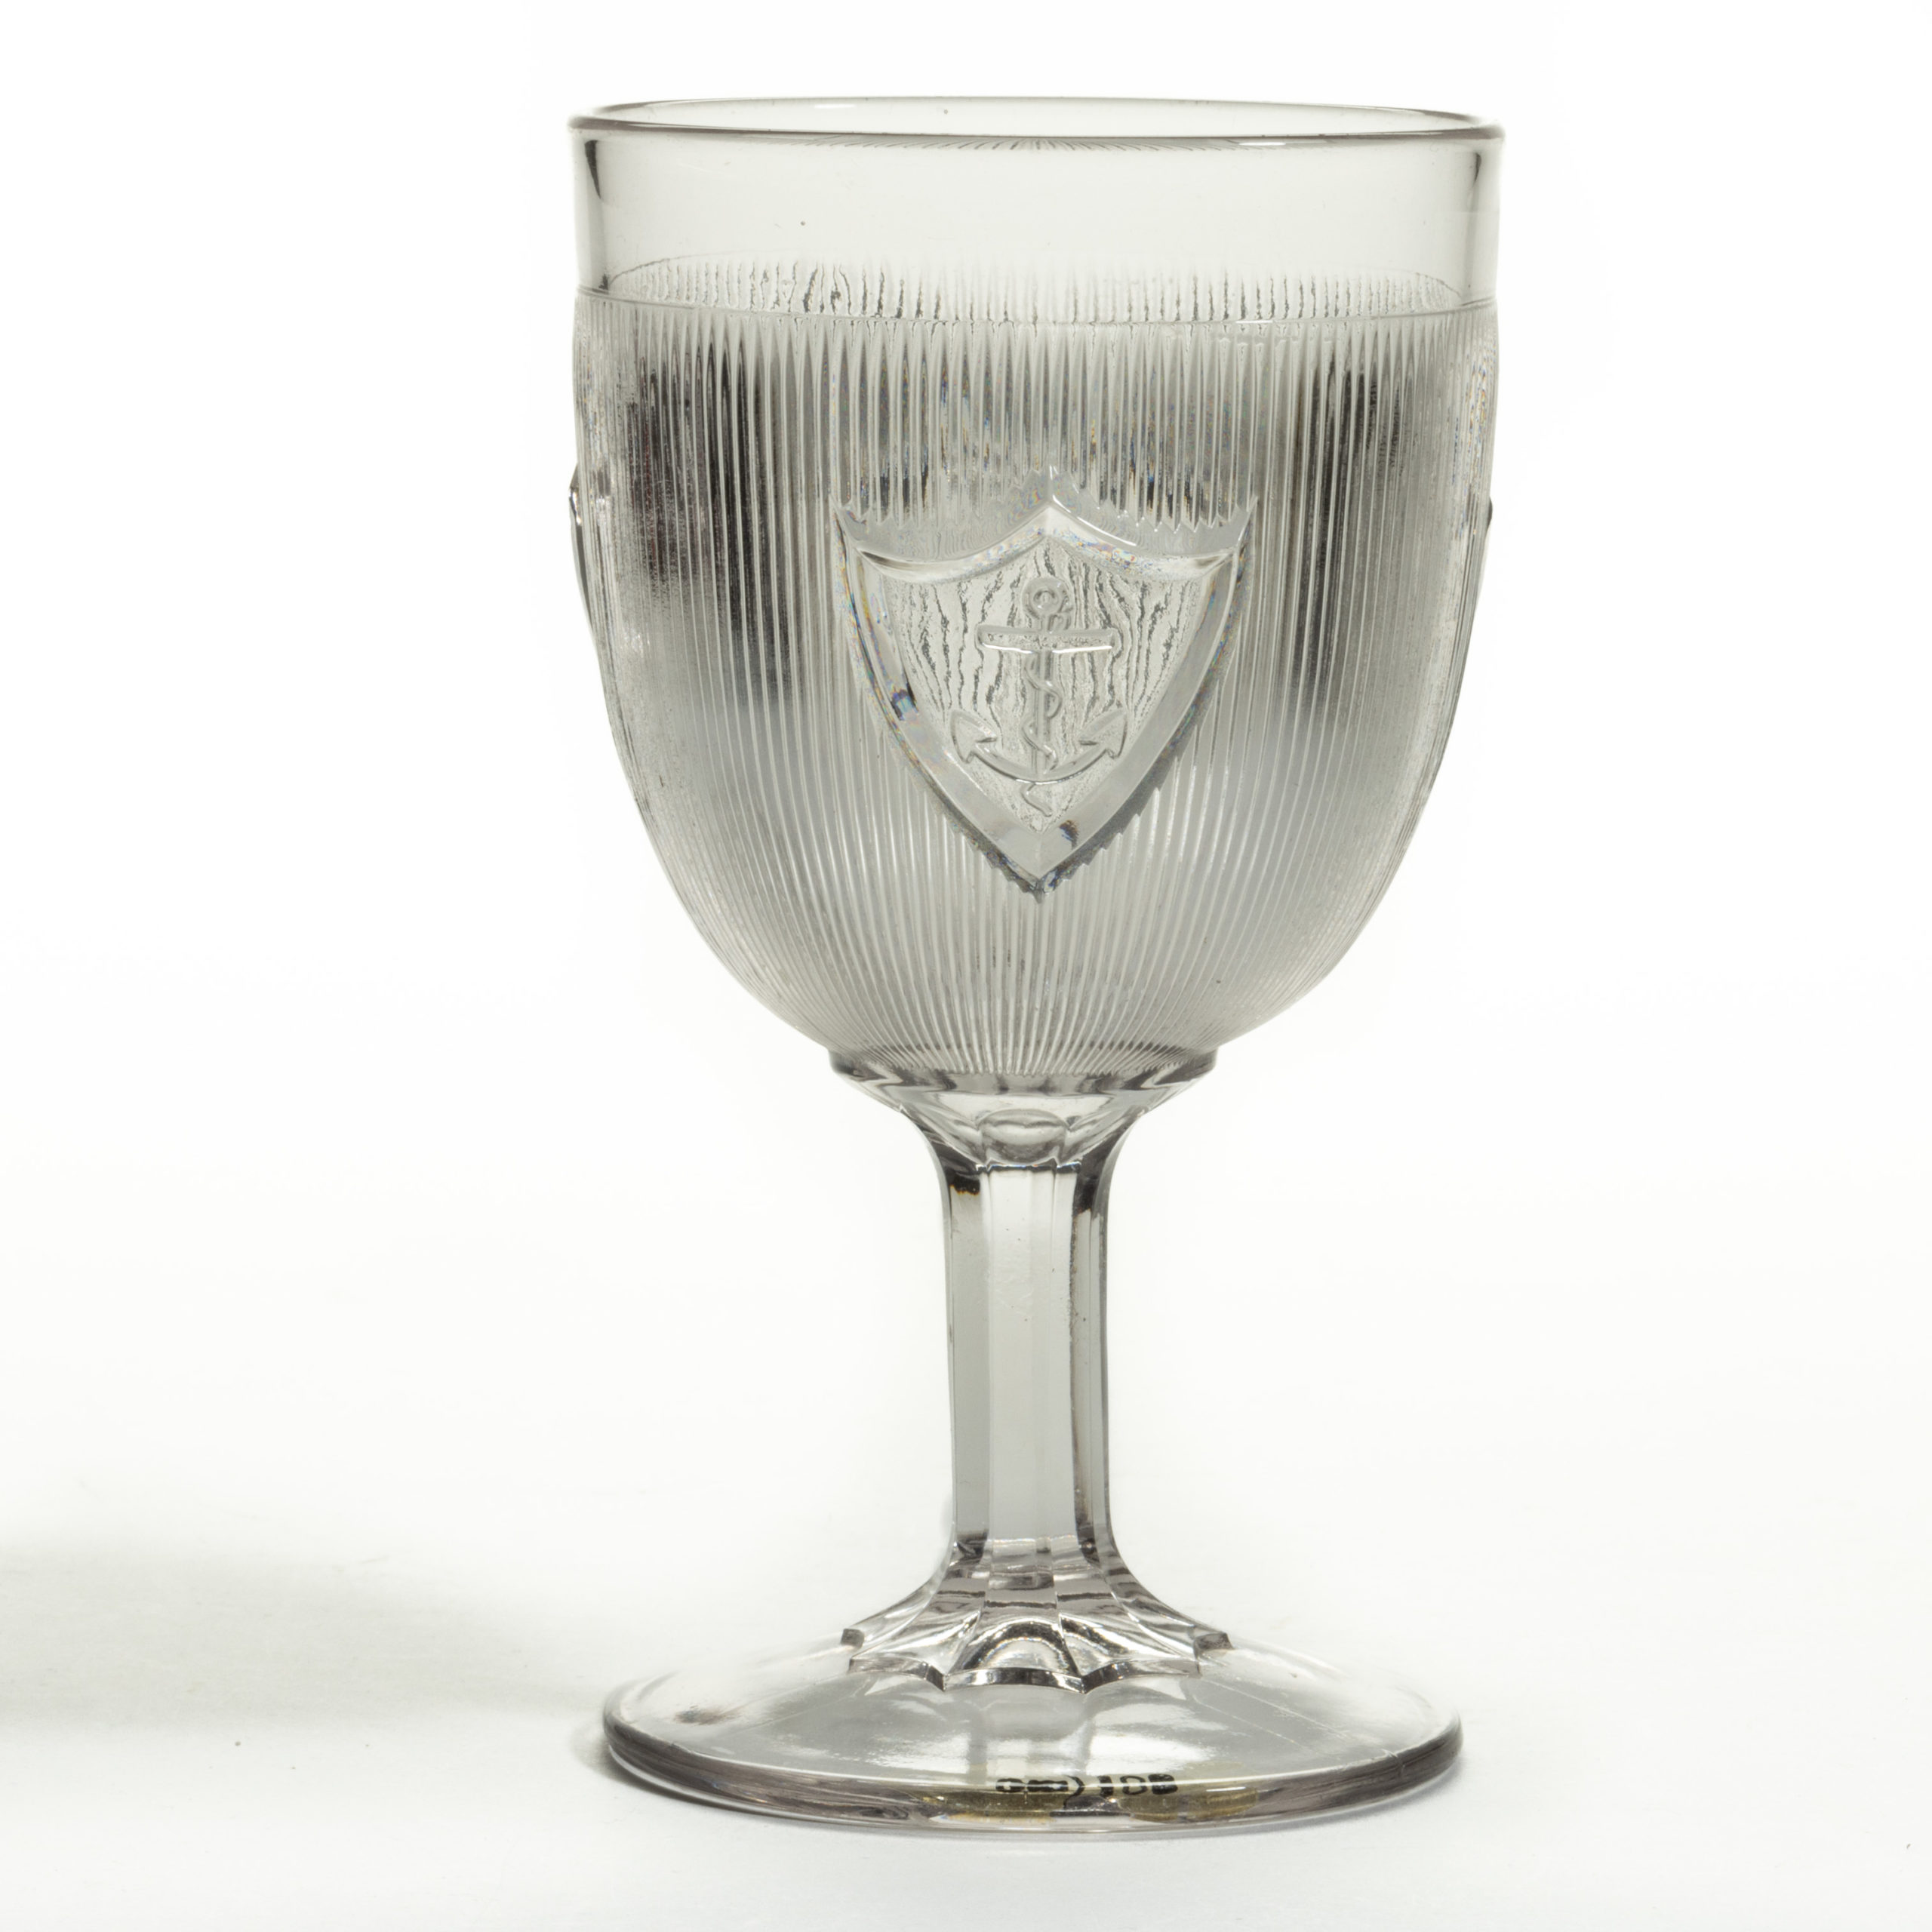 RHODE ISLAND / SHIELD AND ANCHOR GOBLET,